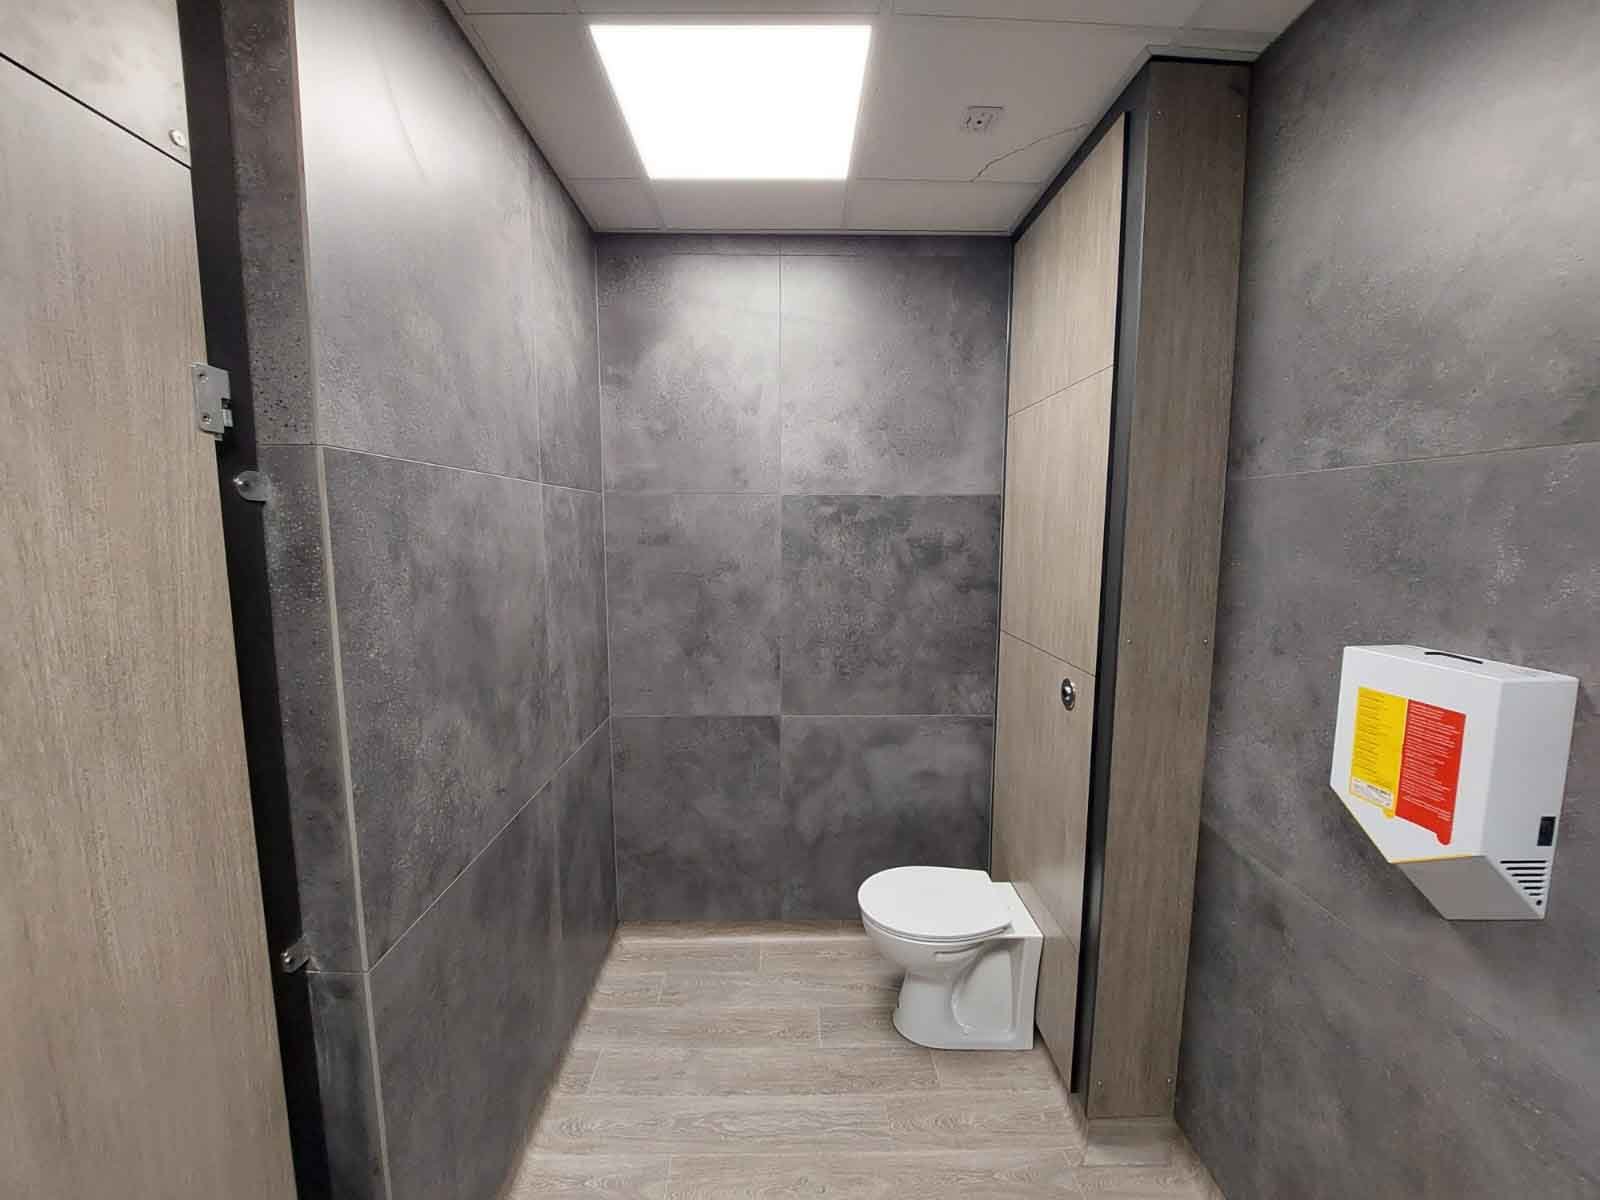  toilet in a washroom cubicle 